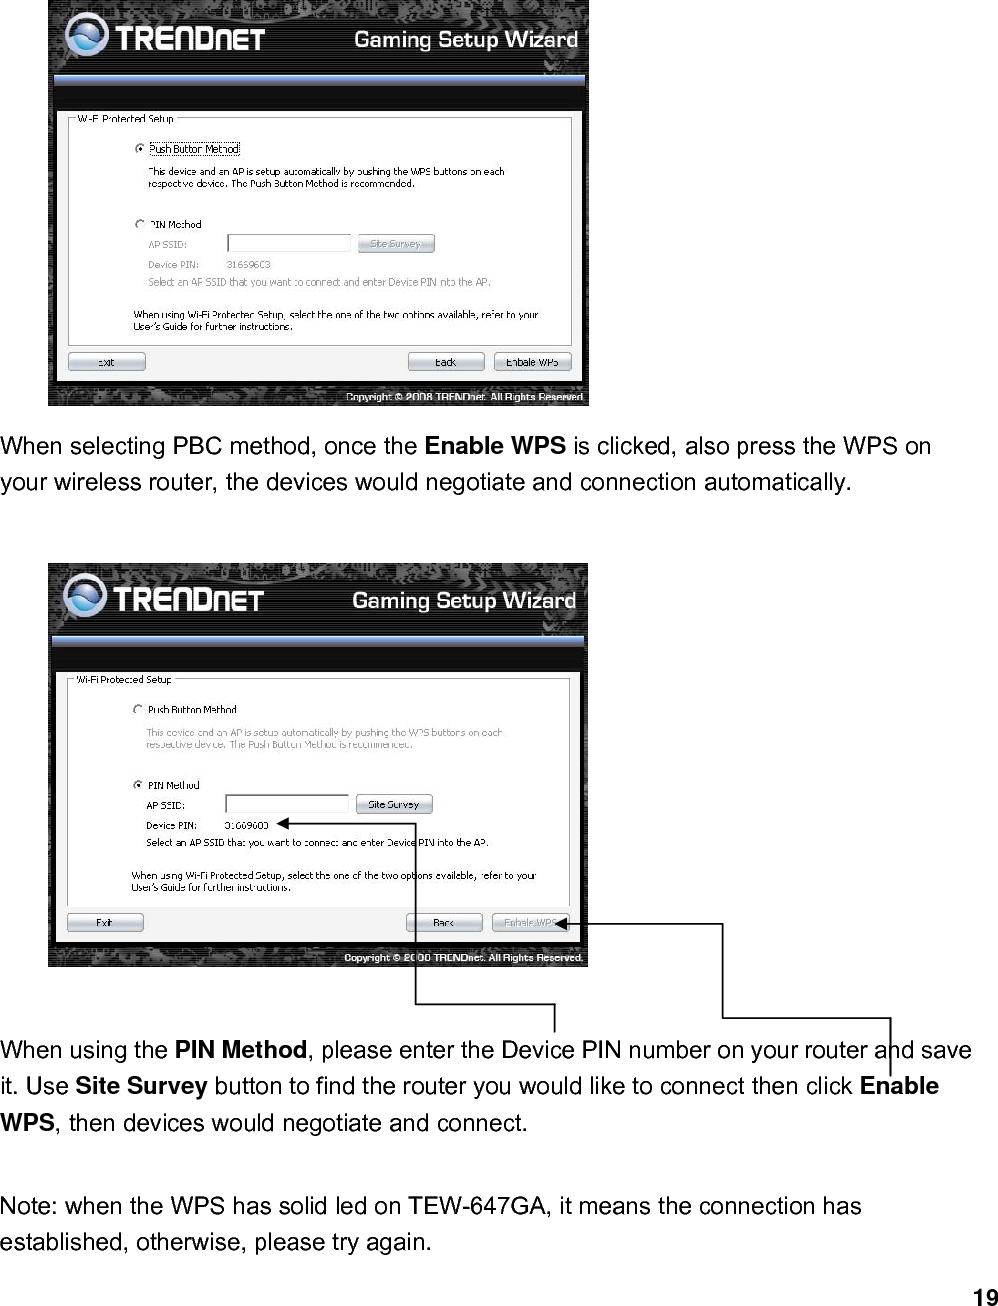                             19 When selecting PBC method, once the Enable WPS is clicked, also press the WPS on your wireless router, the devices would negotiate and connection automatically.          When using the PIN Method, please enter the Device PIN number on your router and save it. Use Site Survey button to find the router you would like to connect then click Enable WPS, then devices would negotiate and connect.  Note: when the WPS has solid led on TEW-647GA, it means the connection has established, otherwise, please try again. 